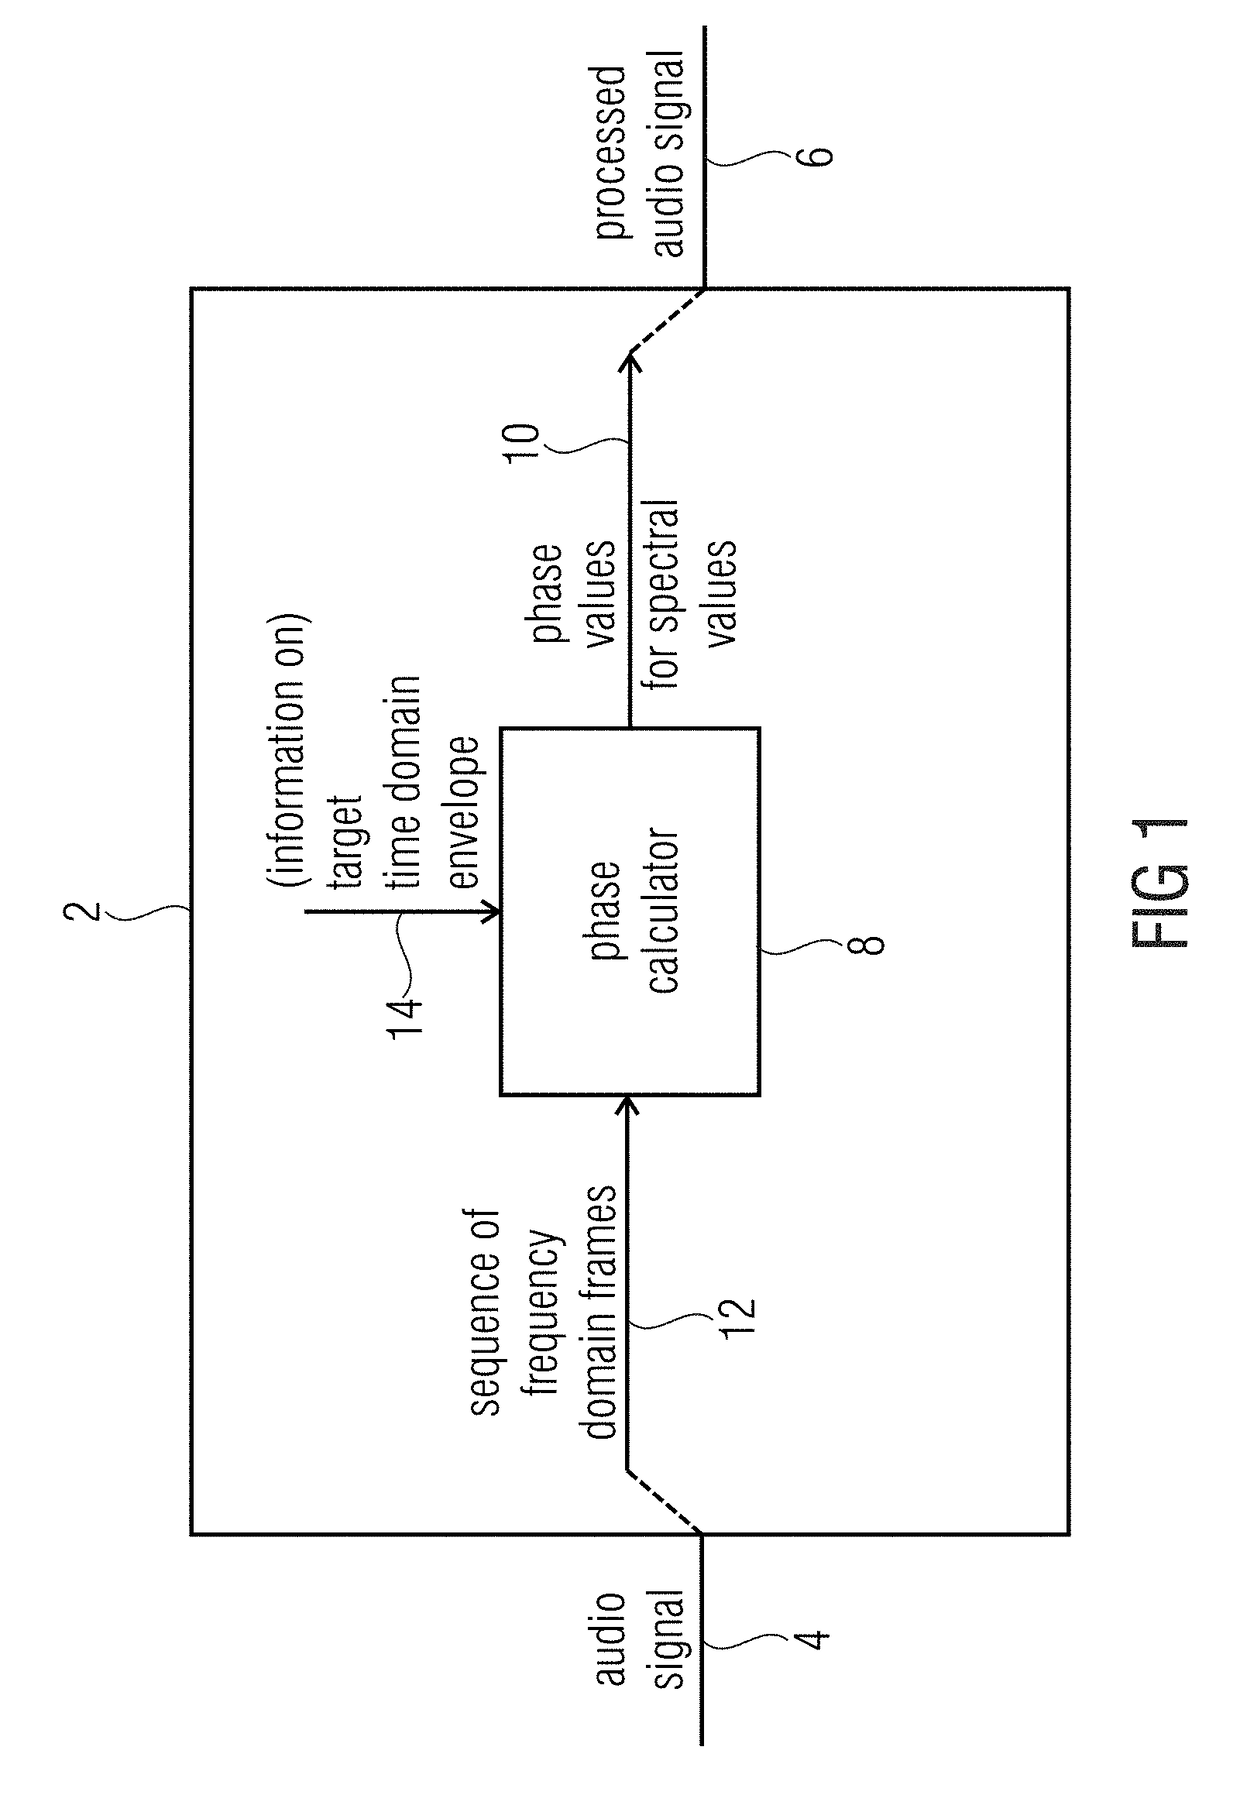 Apparatus and method for processing an audio signal to obtain a processed audio signal using a target time-domain envelope